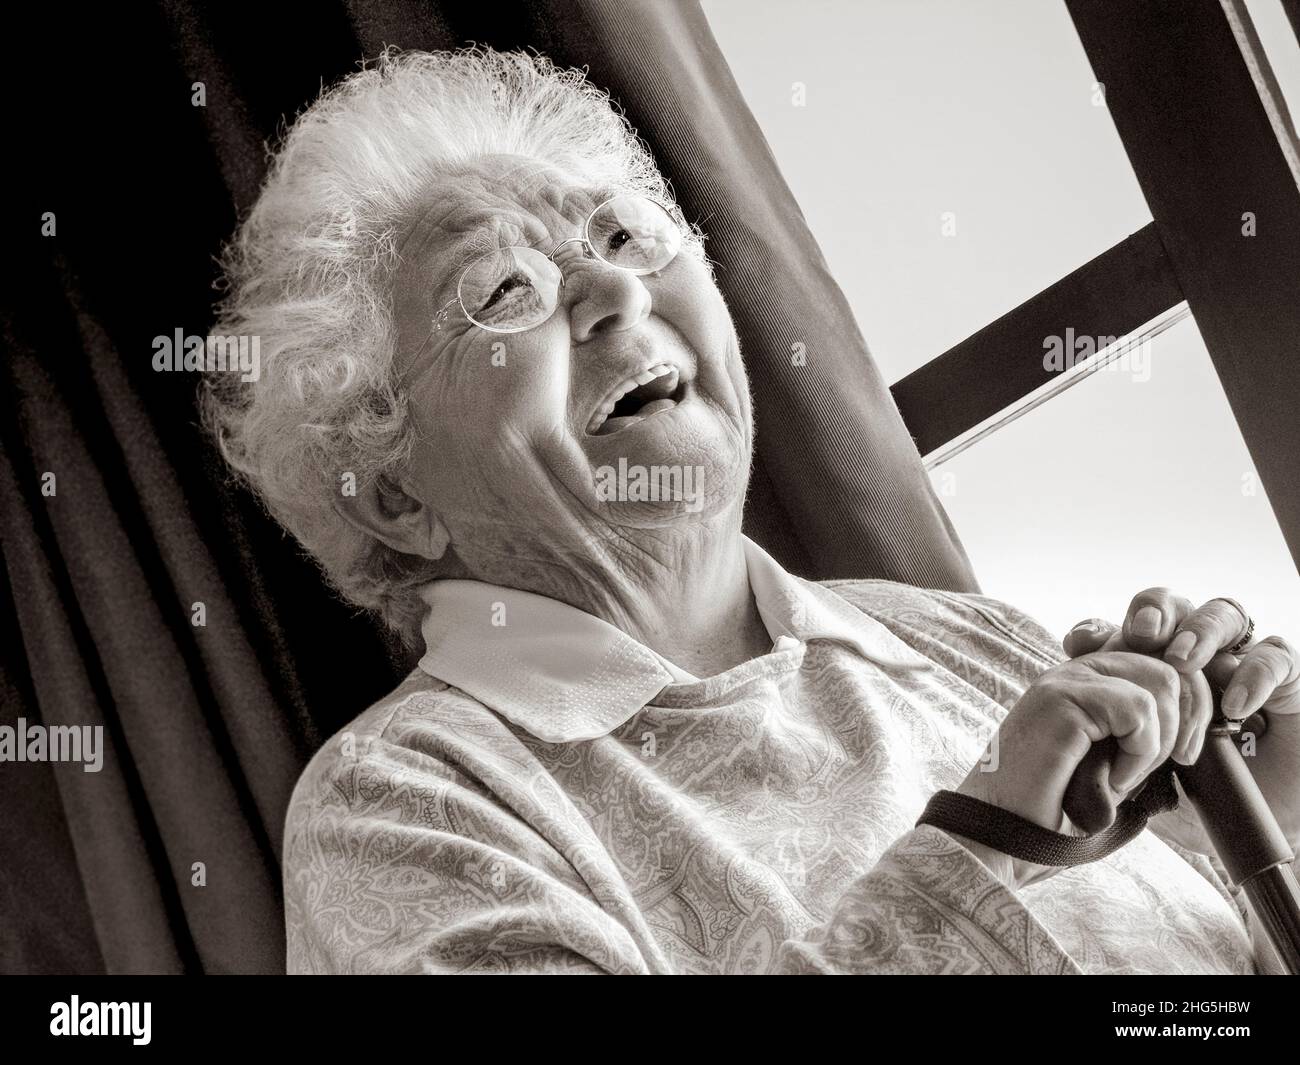 ELDERLY LADY Laughing happy independent senior old age elderly woman sitting by window with walking stick inside her light modern home B&W treatment Stock Photo